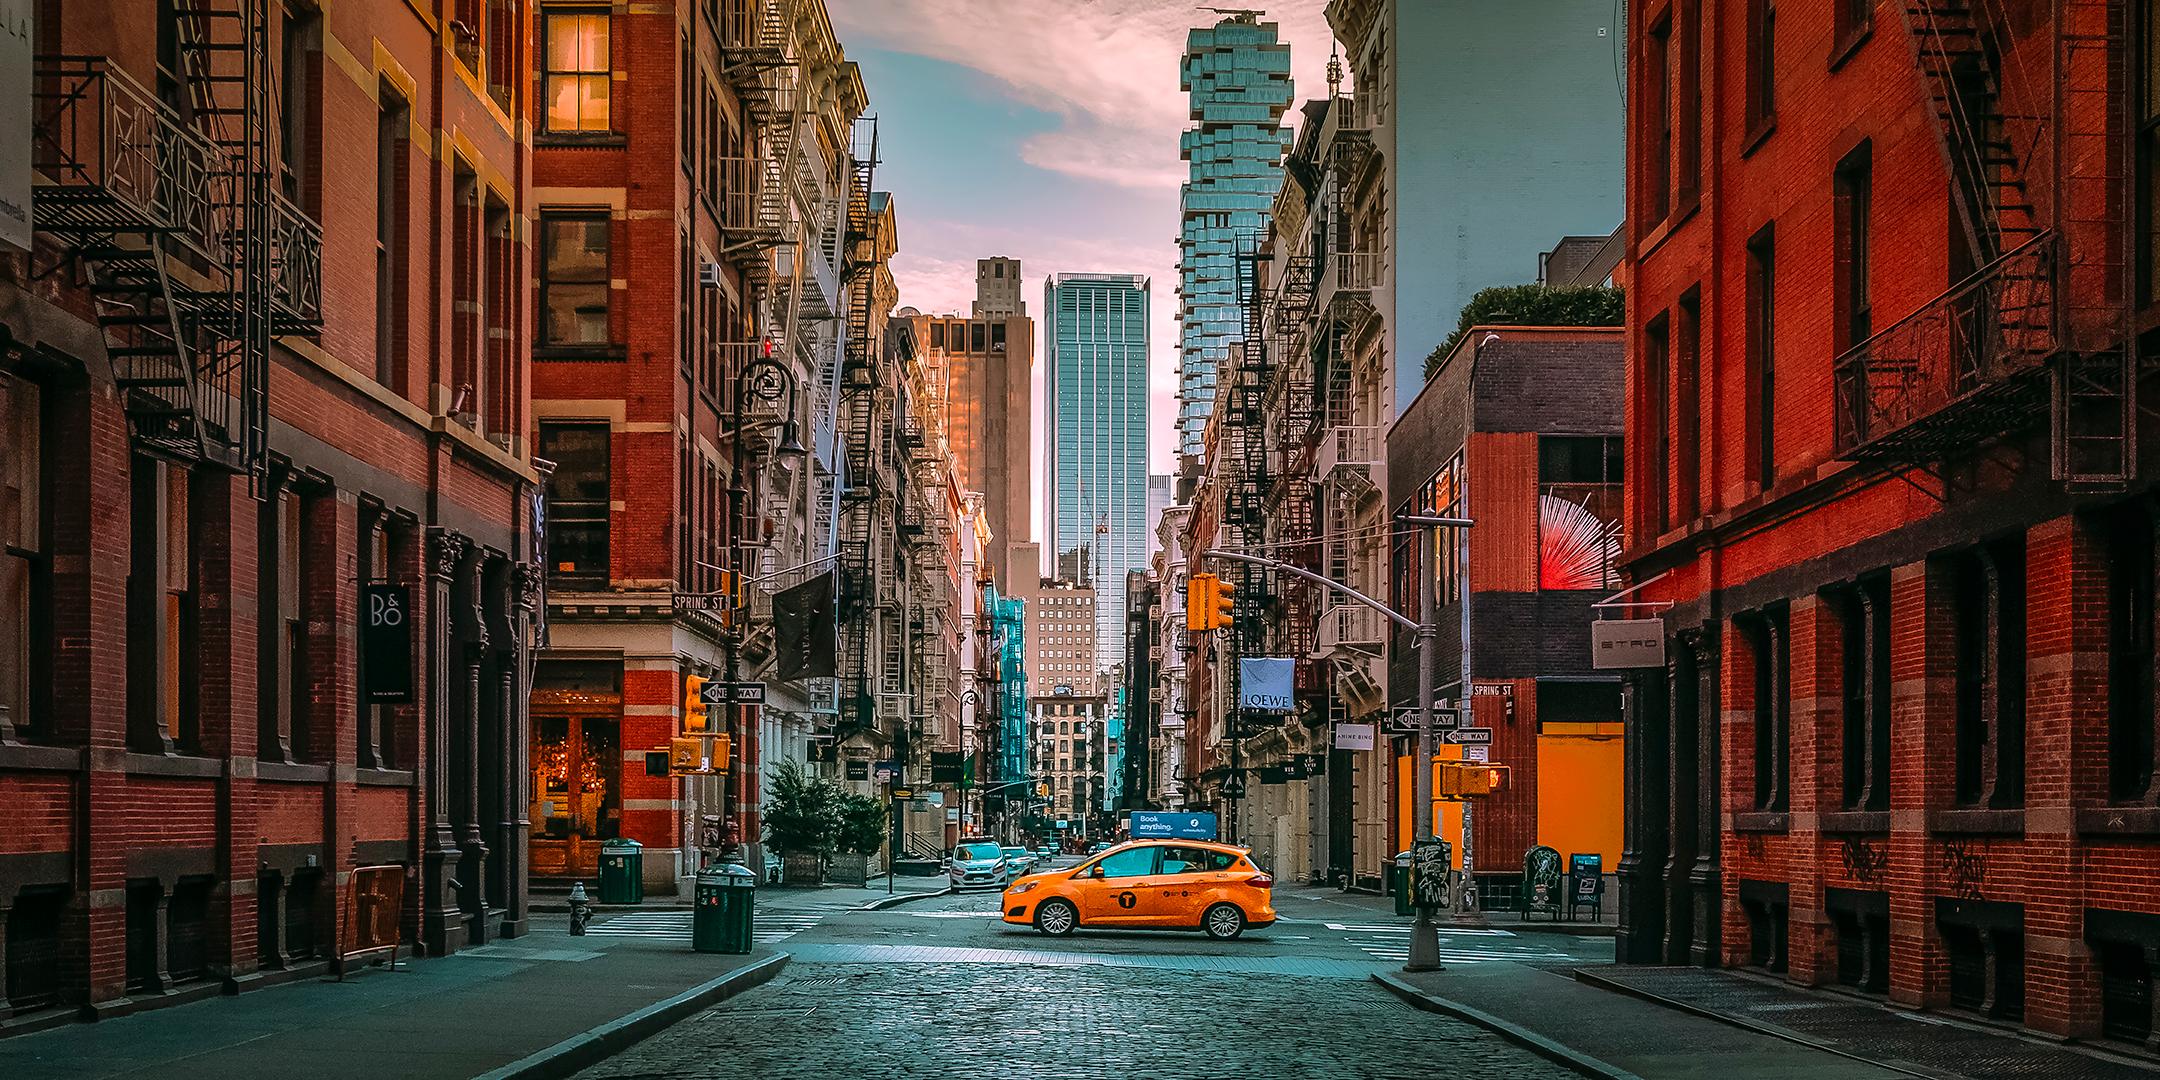 Viet Chu Landscape Photograph - SoHo Cab - NYC Photography, 30"x58", Signed Limited Edition of 5